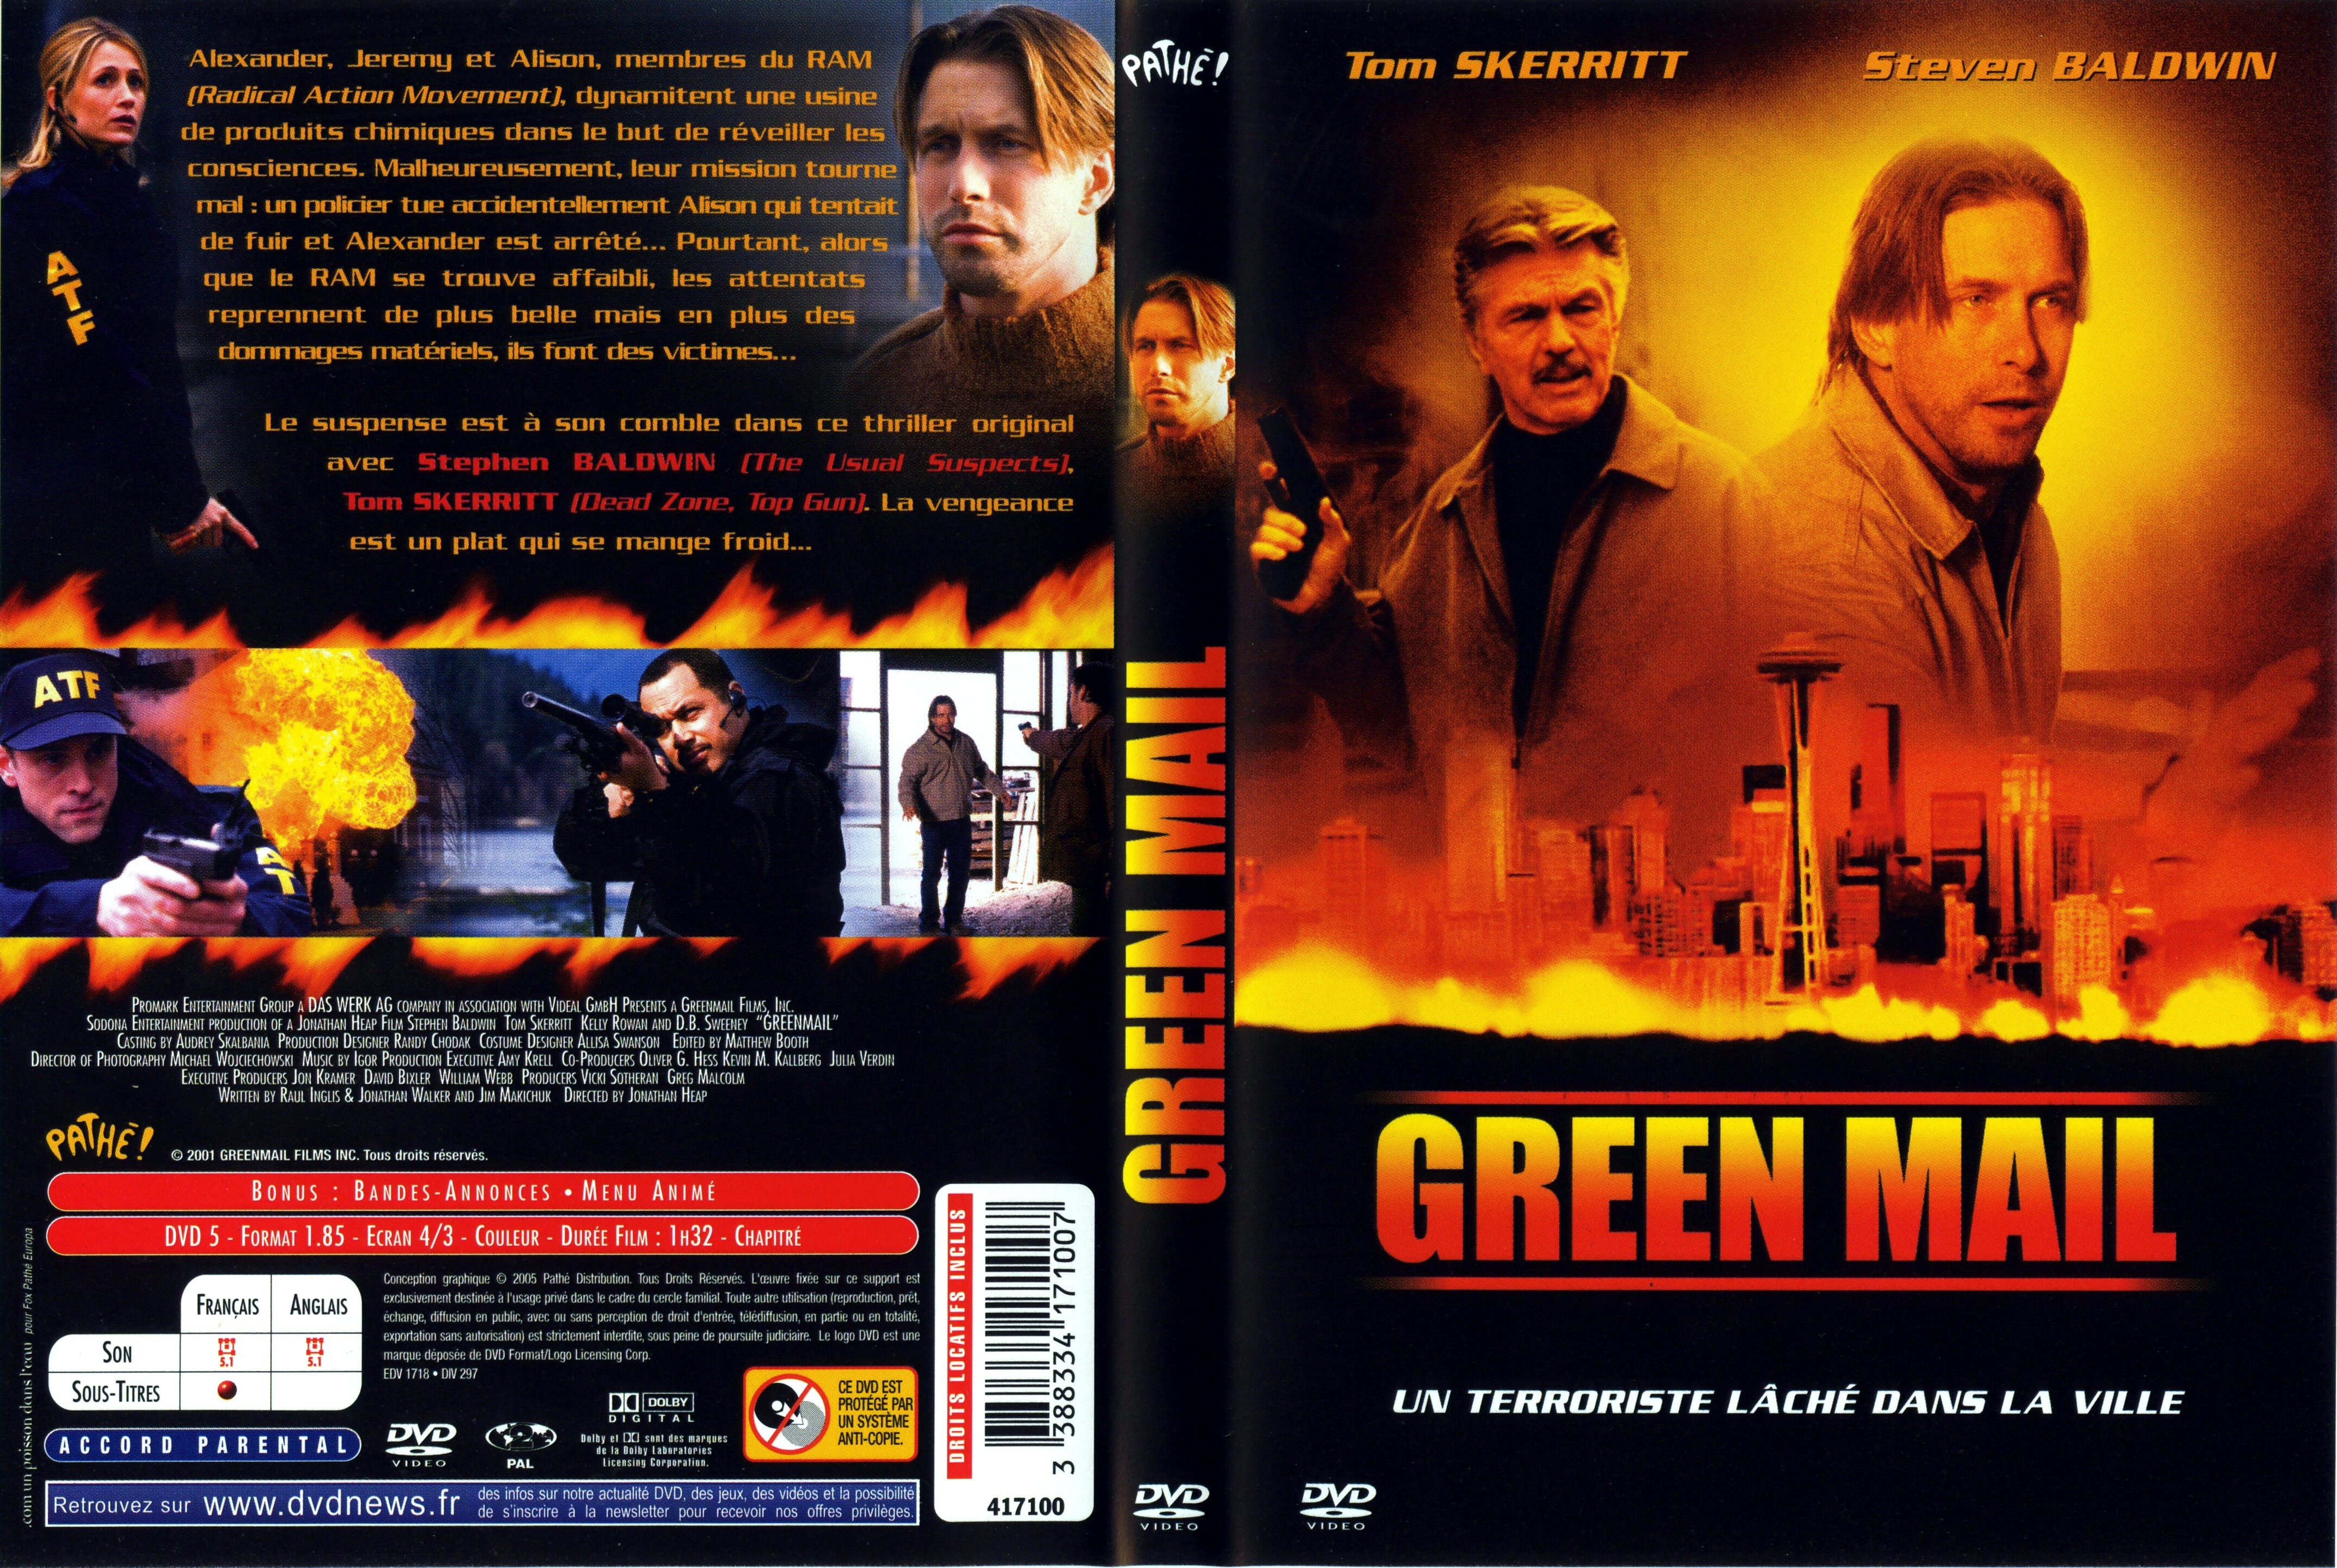 Jaquette DVD Green mail